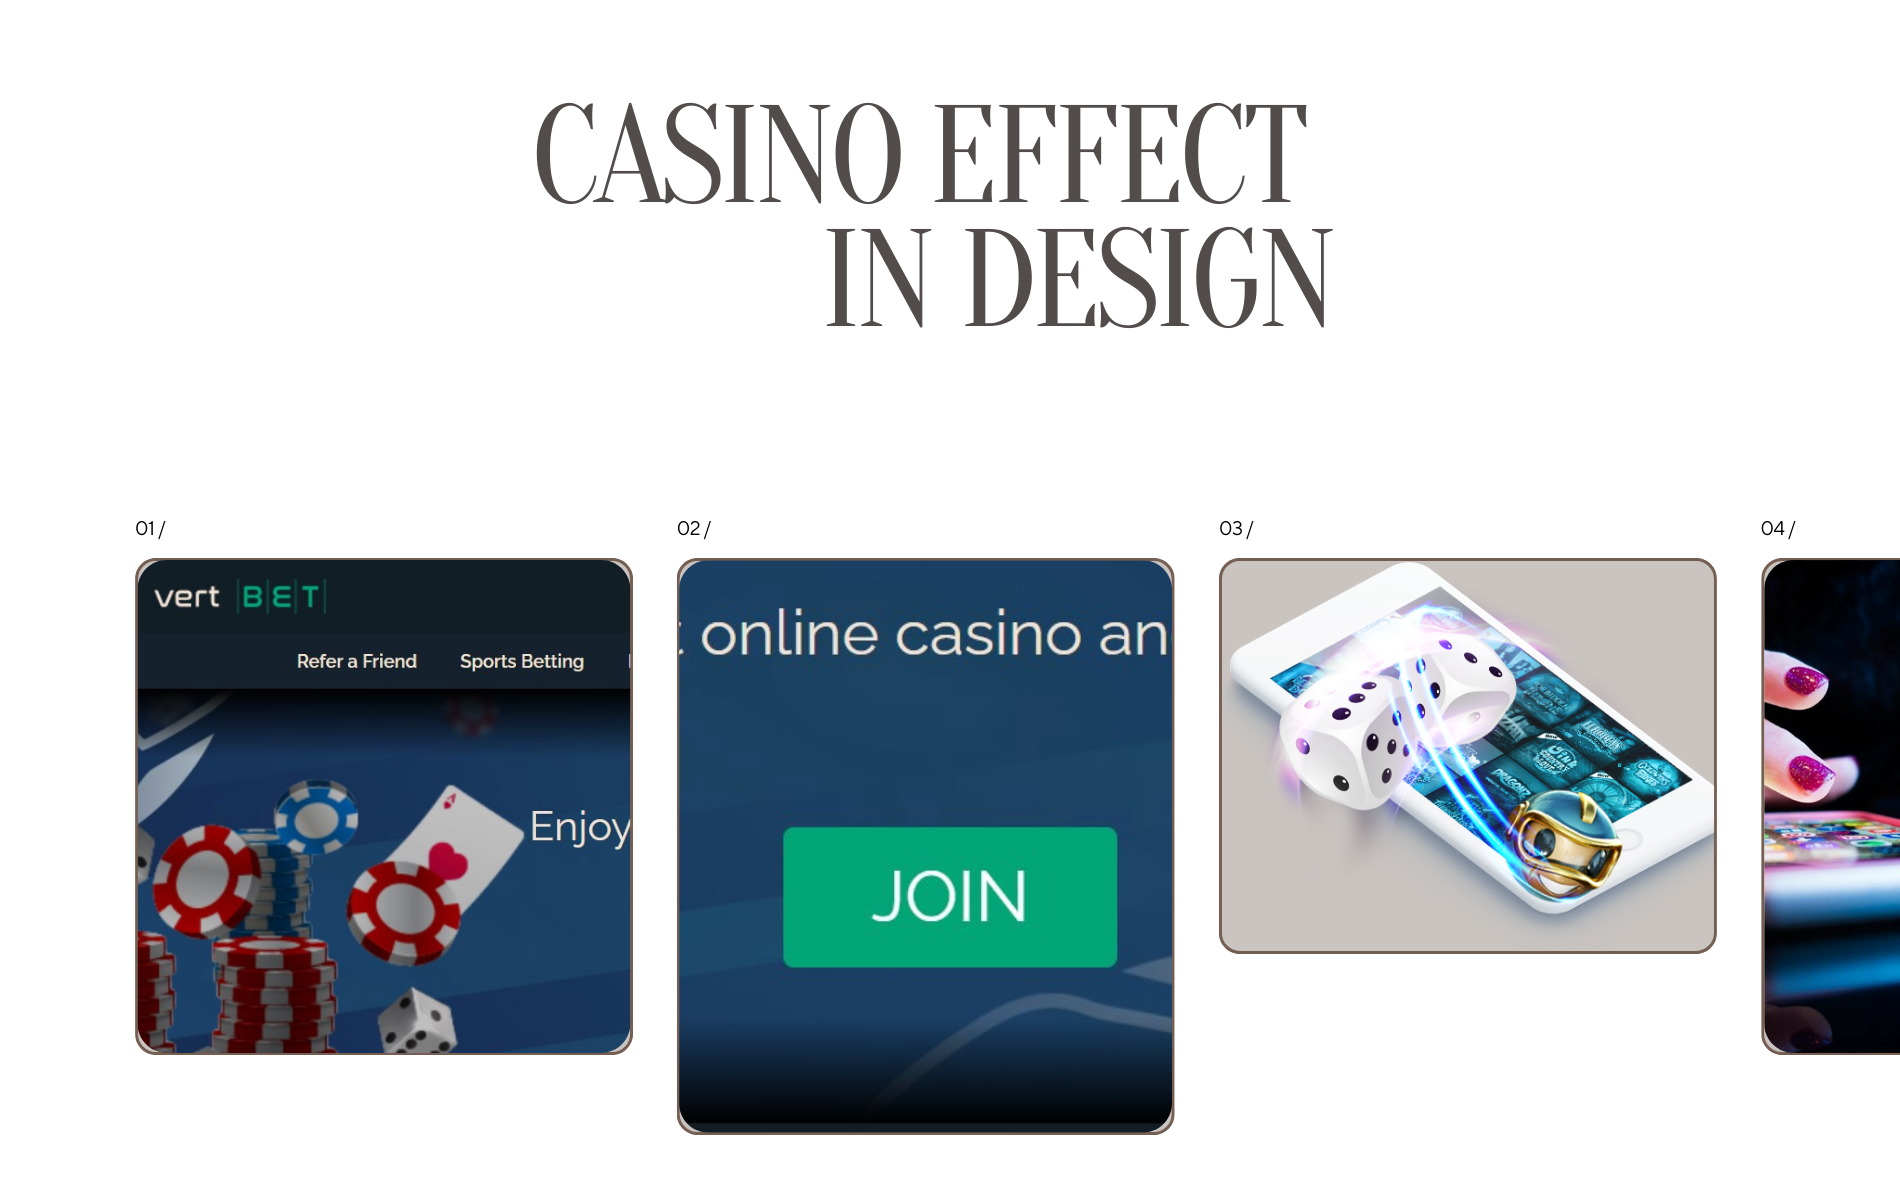 How To Keep Your Users Coming Back For More With The “Casino Effect”